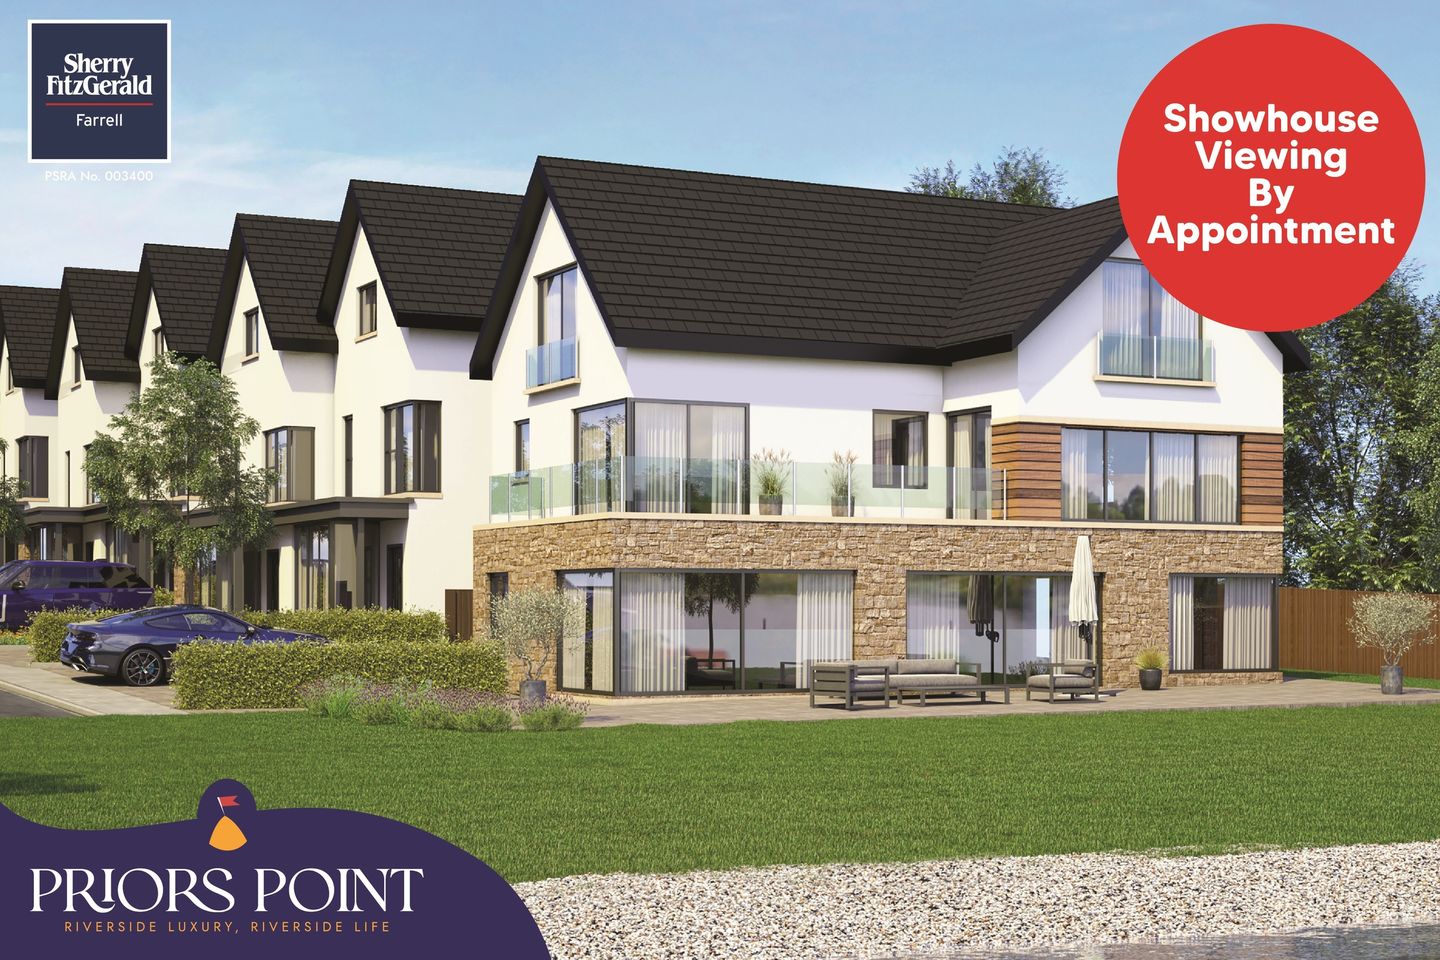 SALE AGREED No.1 The Crescent, Priors Point, Priors Point, Attirory, Carrick-on-Shannon, Co. Leitrim